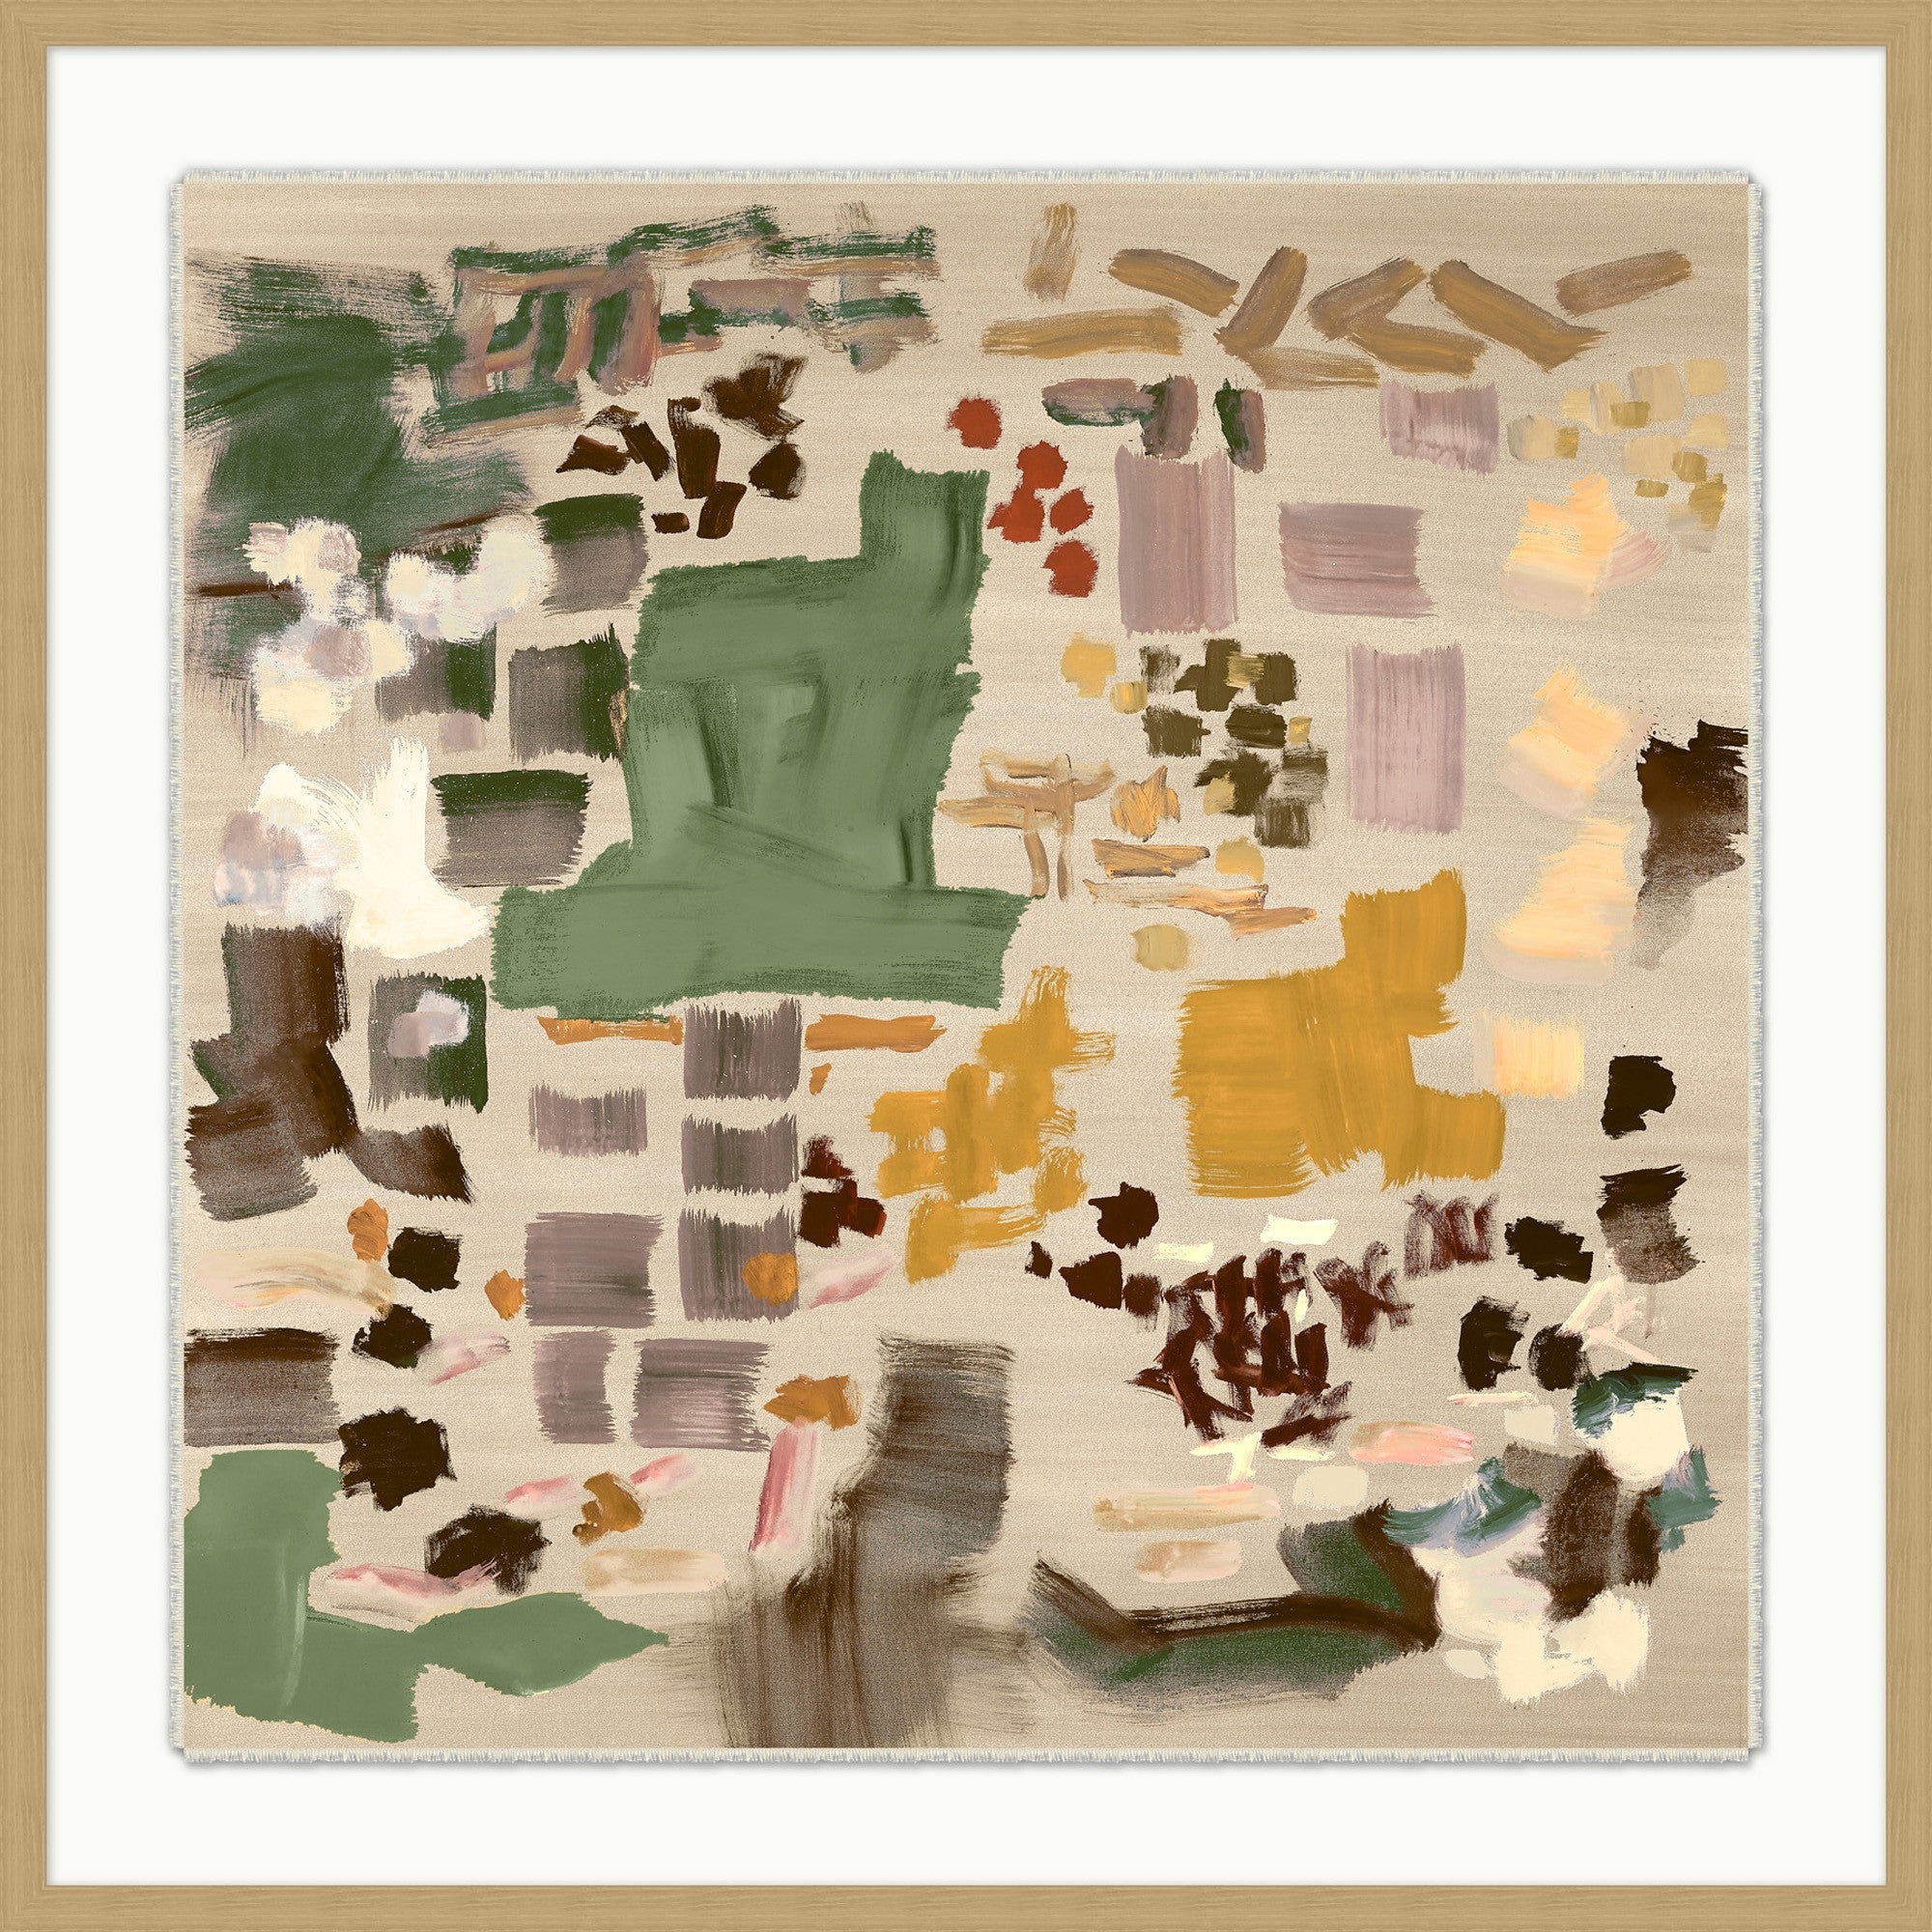 Giclee on raw canvas with hand frayed edges mounted on a mat and framed in a gorgeous shadow box, this Abstract Earth 1 Art is sure to make a statement in any living room, bathroom, or office.   Size: 42x42  Please allow 6-8 weeks for production and delivery.